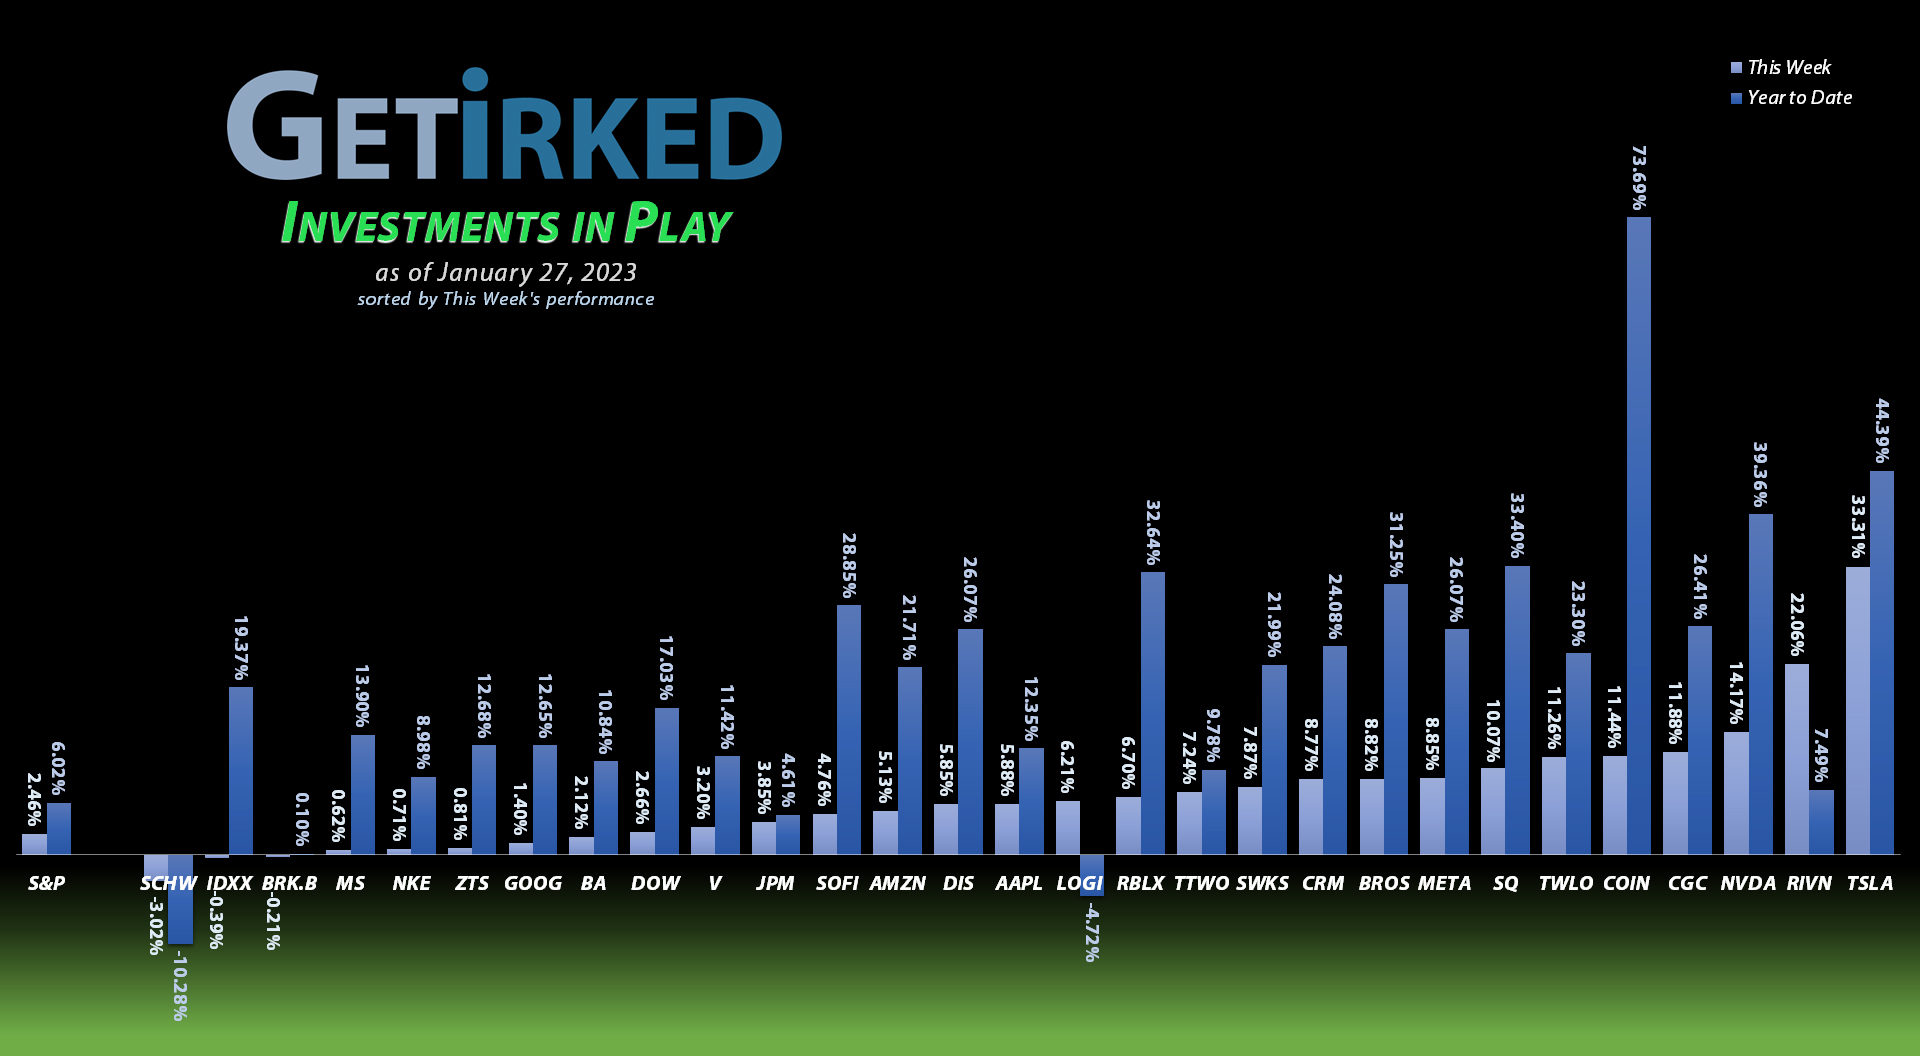 Get Irked - Investments in Play - January 27, 2023